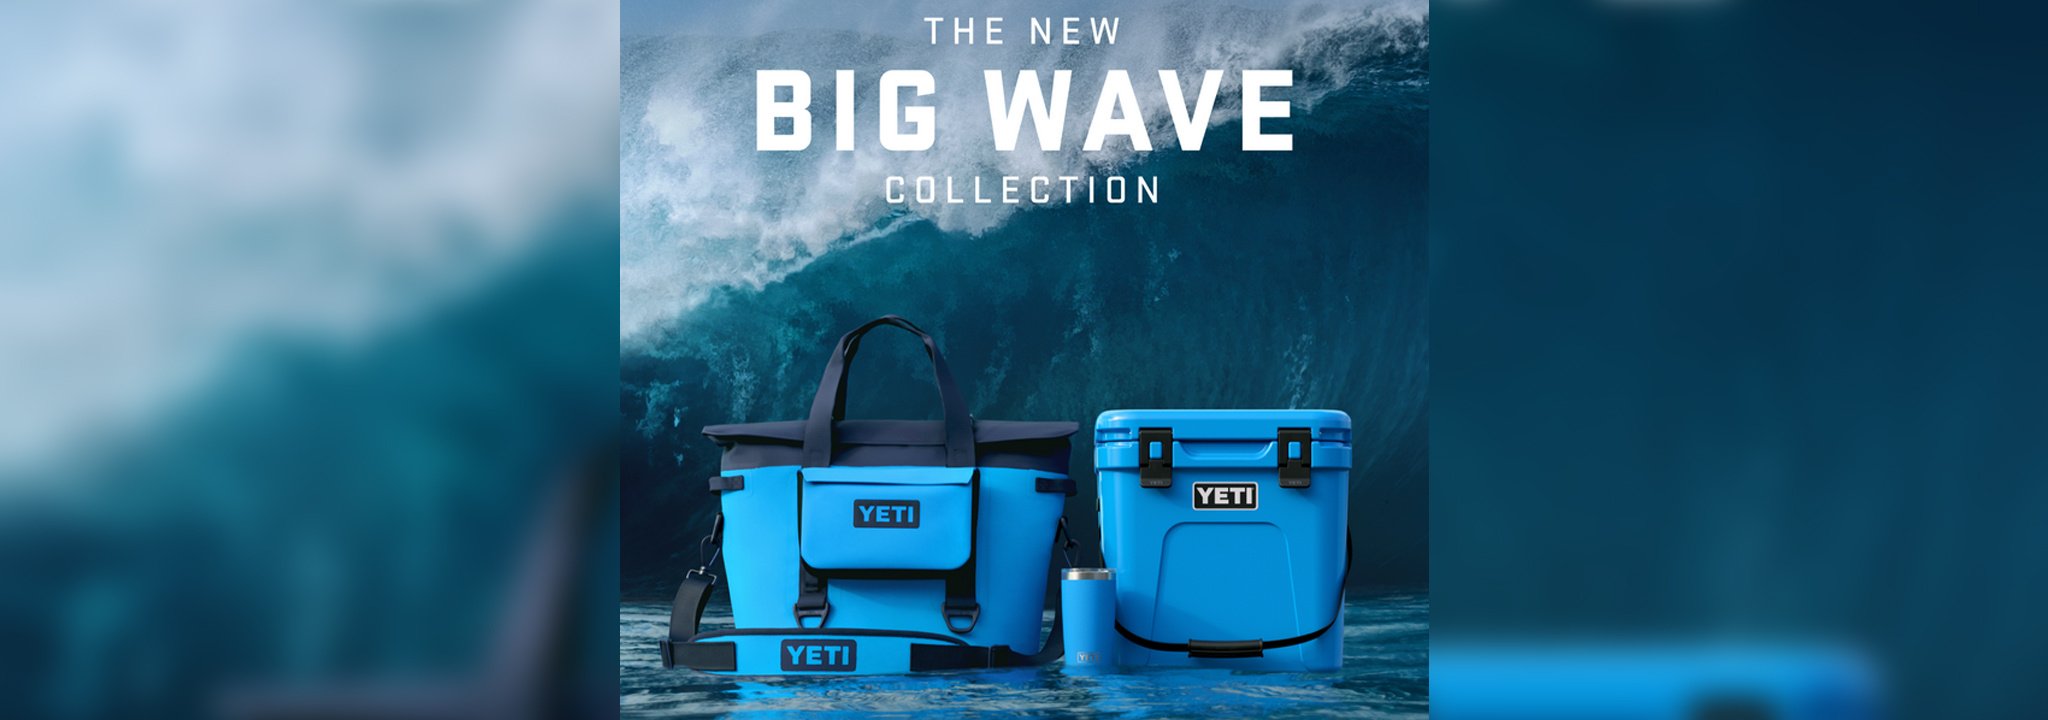 BIG WAVE BLUE COLLECTION